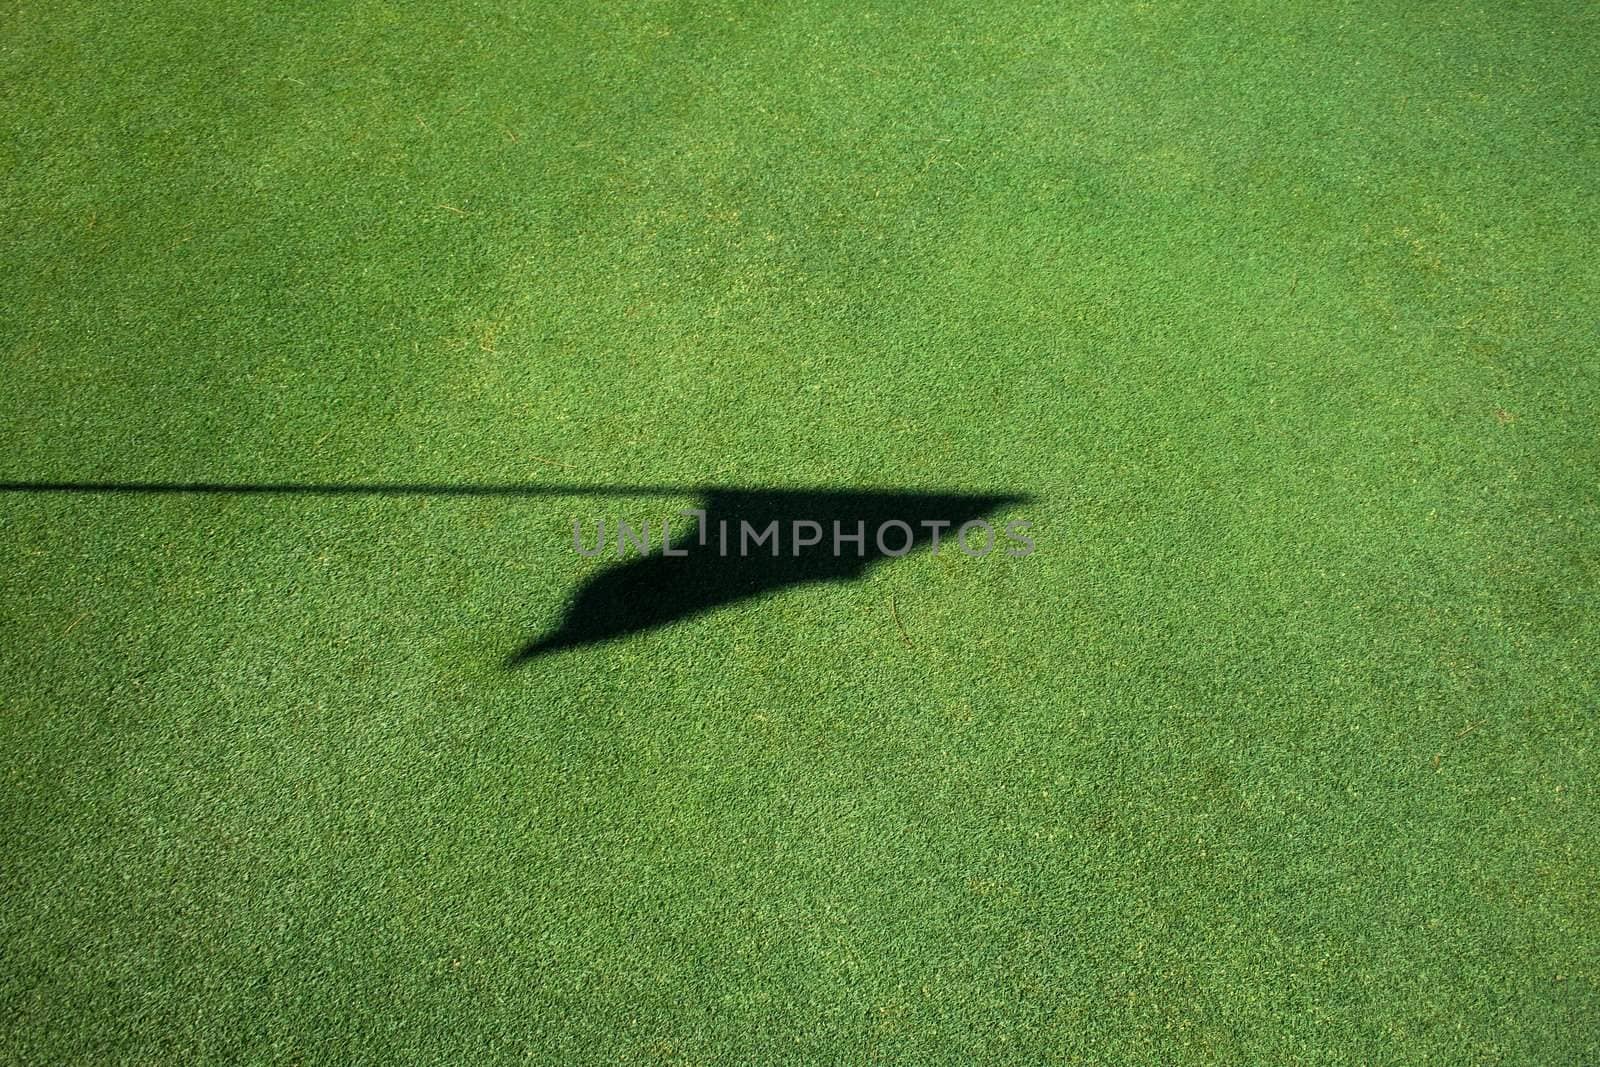 Shadow of flag on top of pin on a golf green